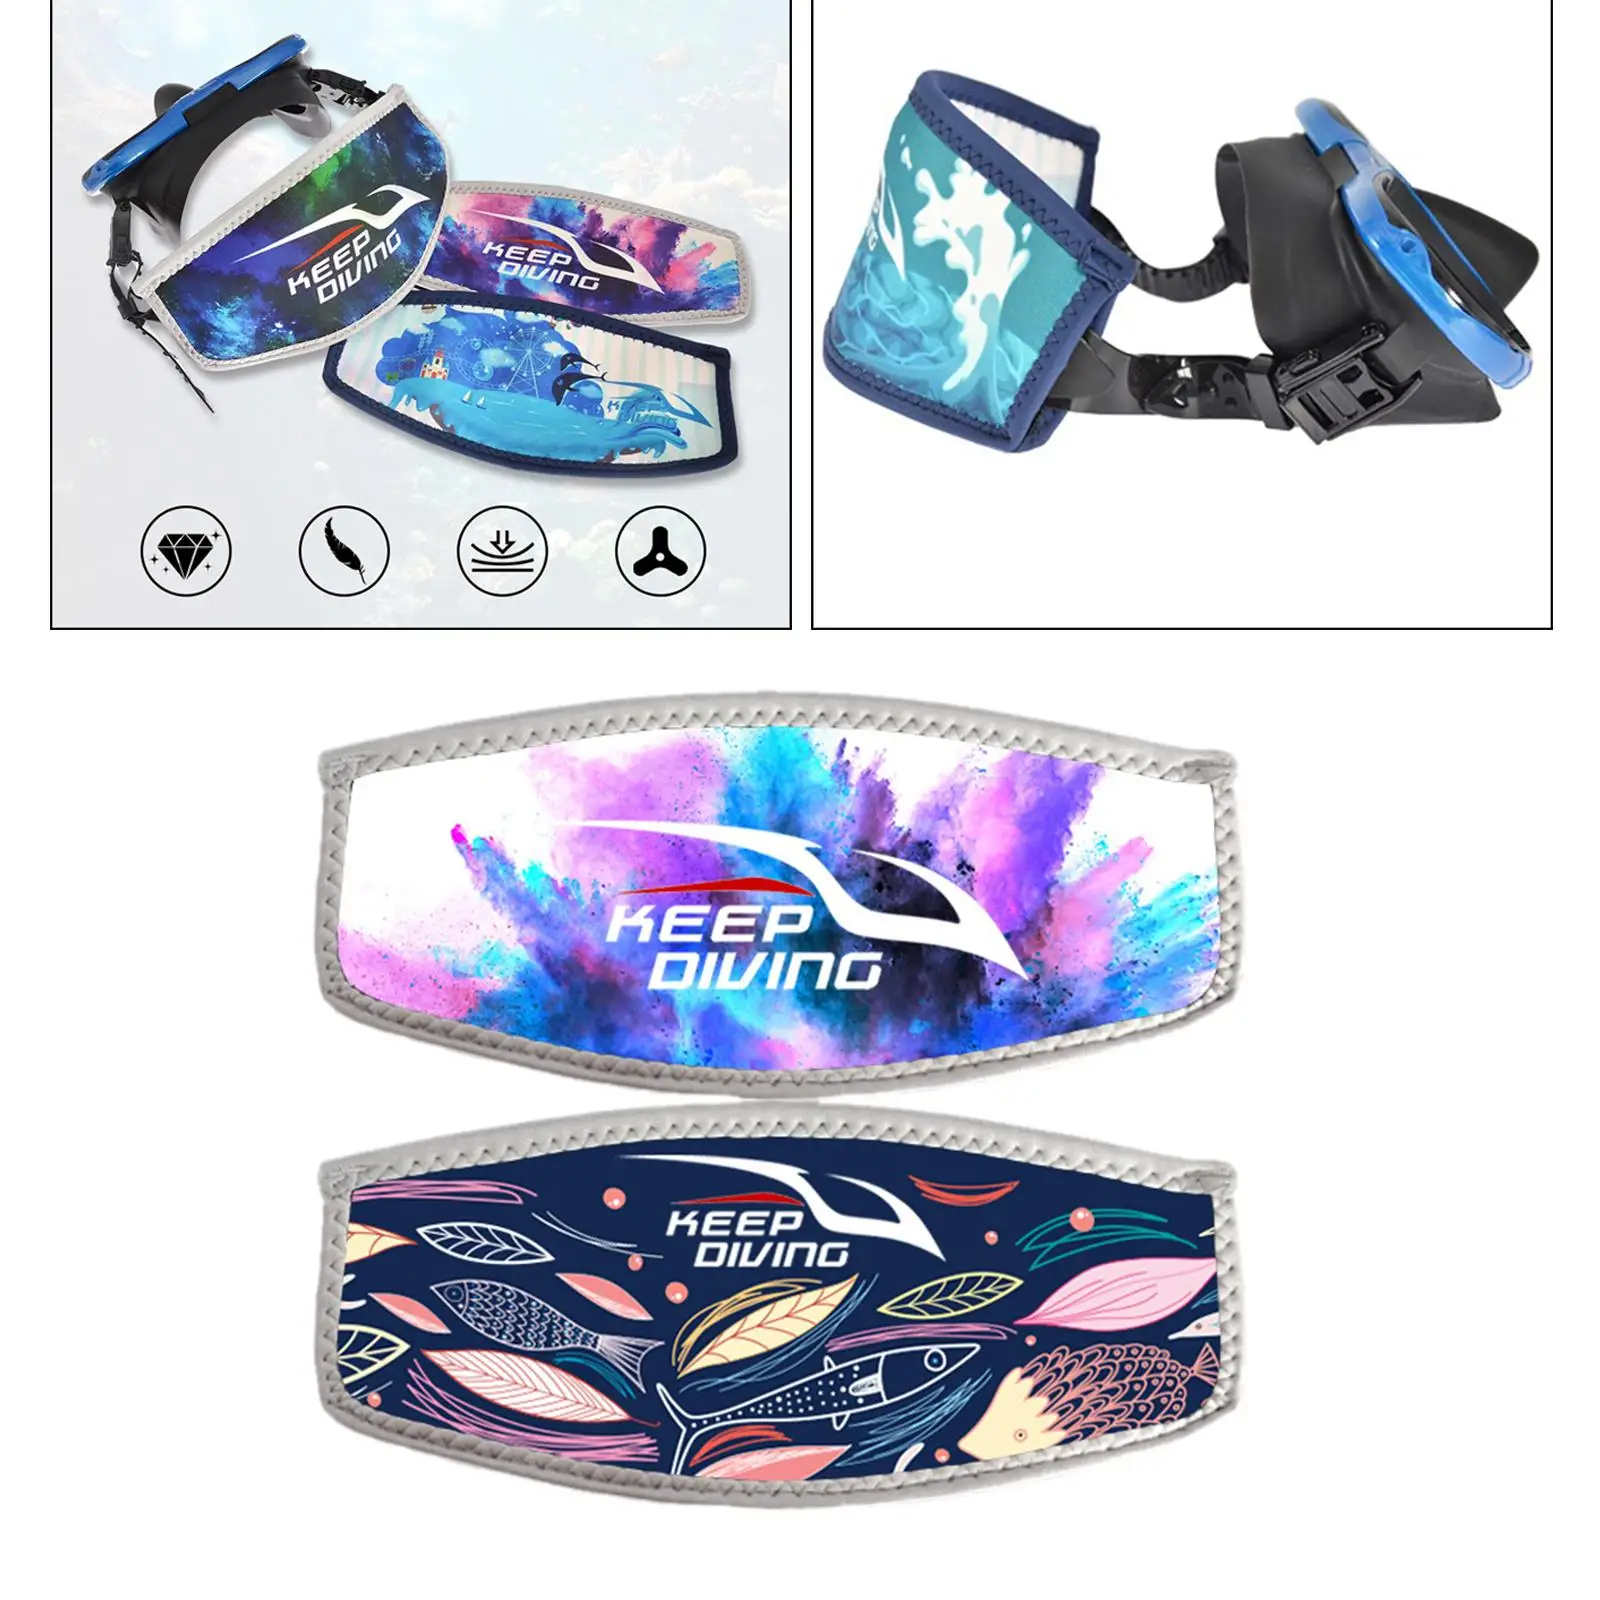 Innovative Scuba Concepts Scuba Diving Mask  Water Sports Snorkeling Mask Strap Cover Protectstion Hair Strap Accessories